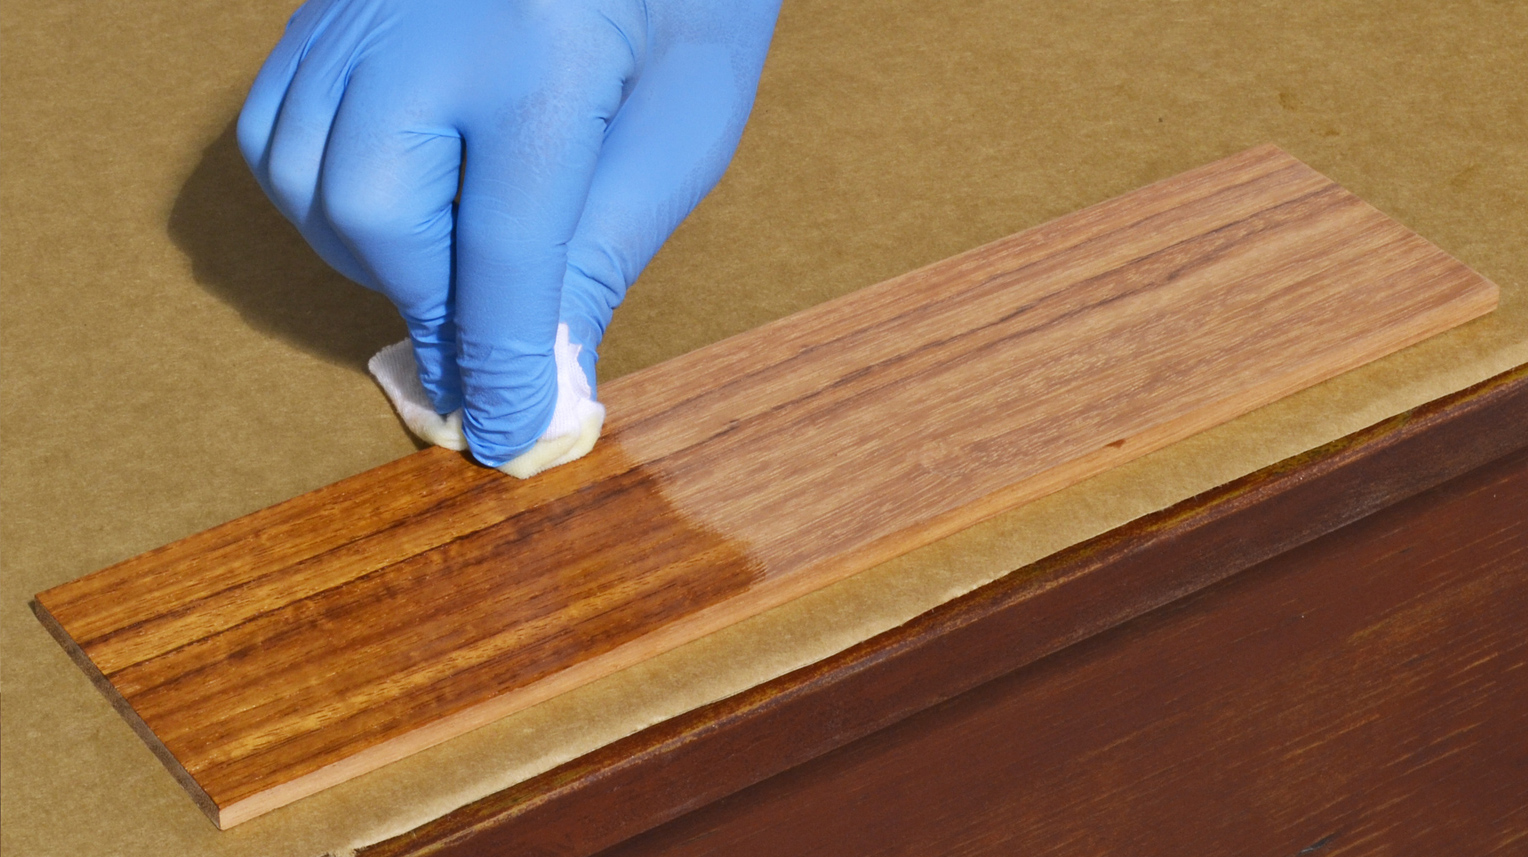 Linseed oil a natural solution for Wood Finishing - Ardec 